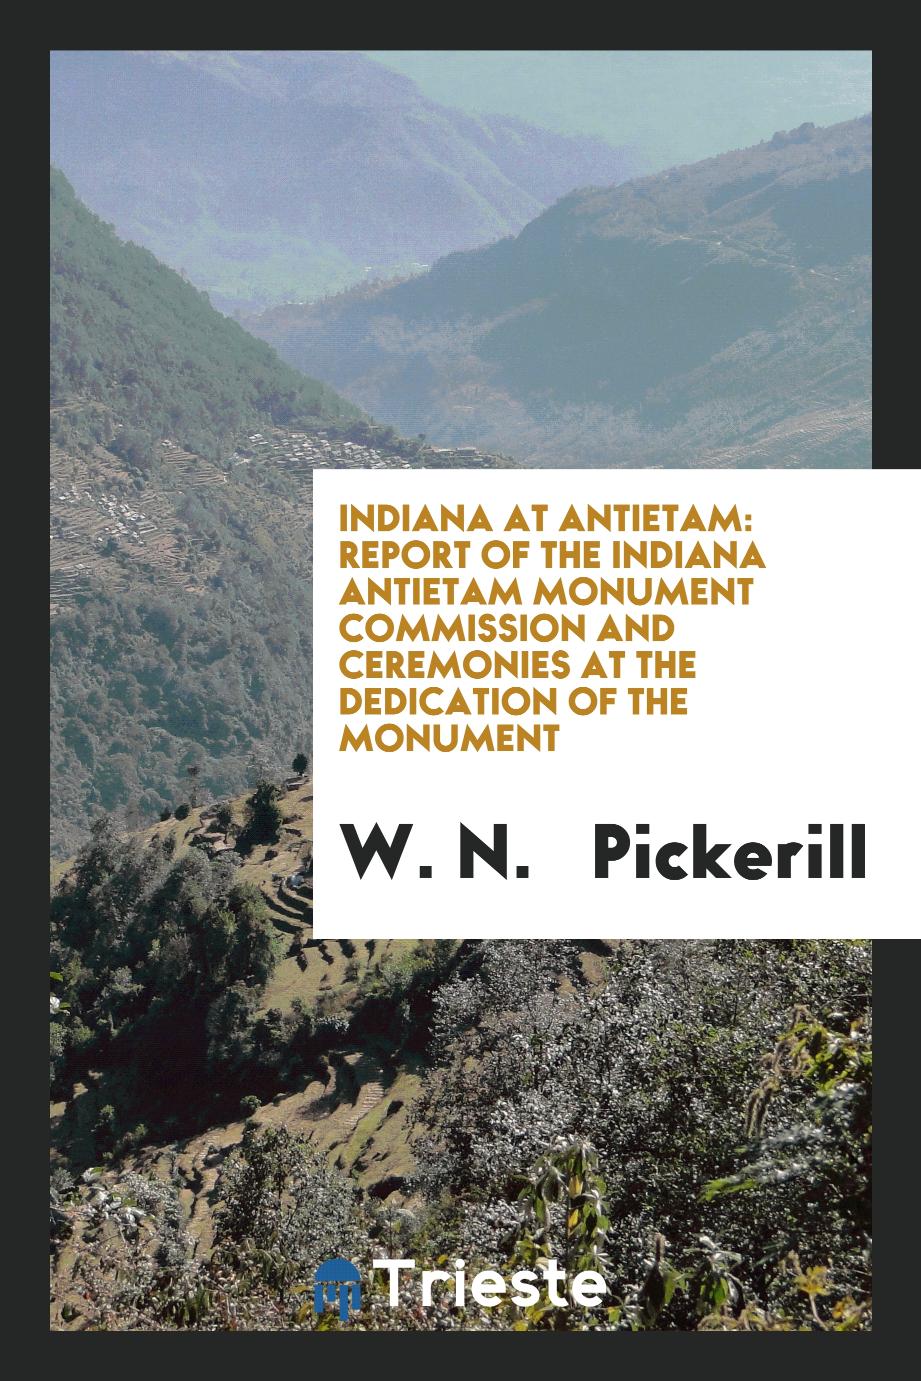 Indiana at Antietam: Report of the Indiana Antietam Monument Commission and Ceremonies at the Dedication of the Monument